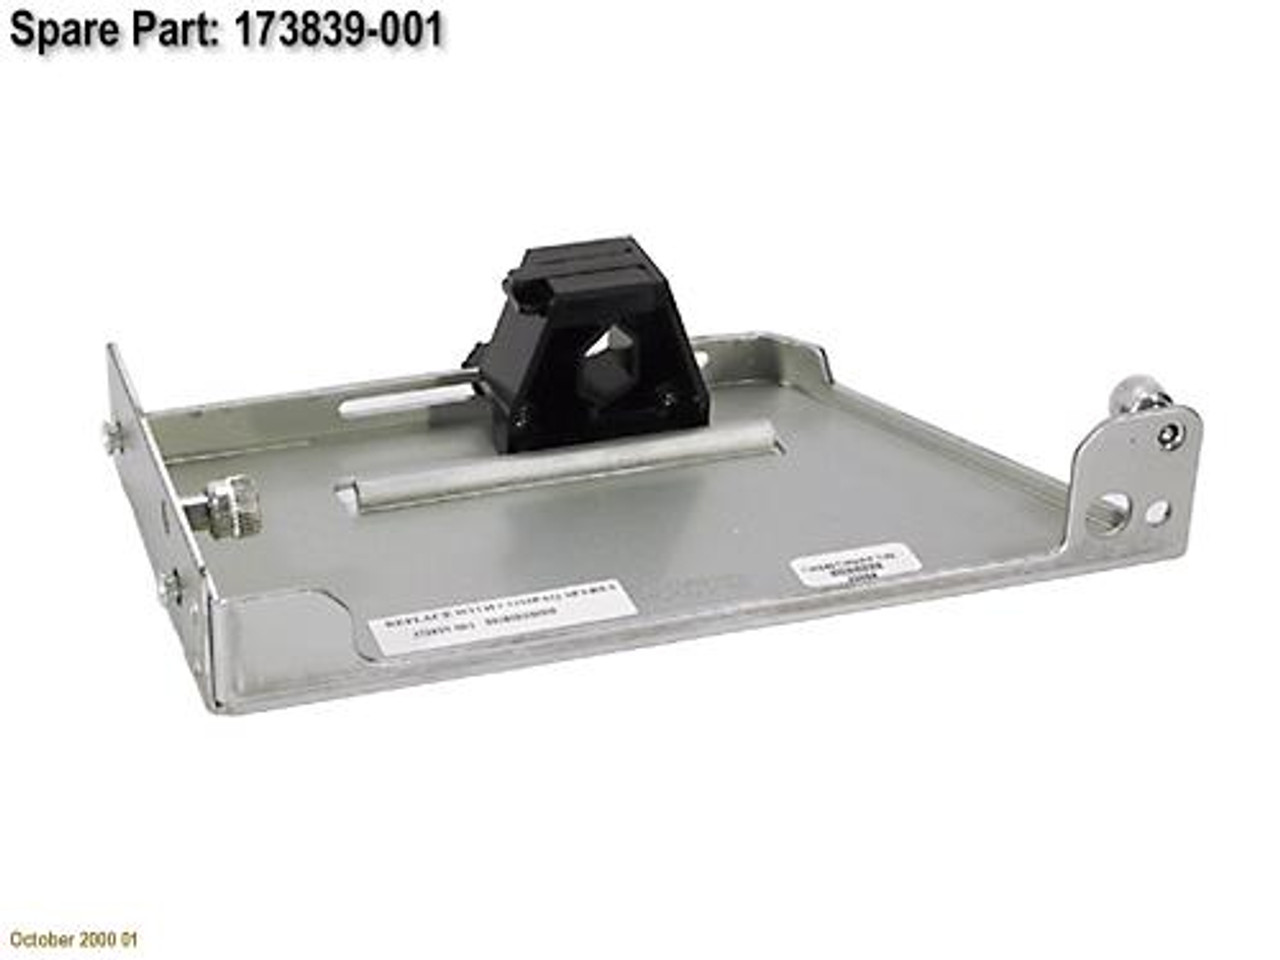 SPS-TRAY;CABLE MGMT - 173839-001